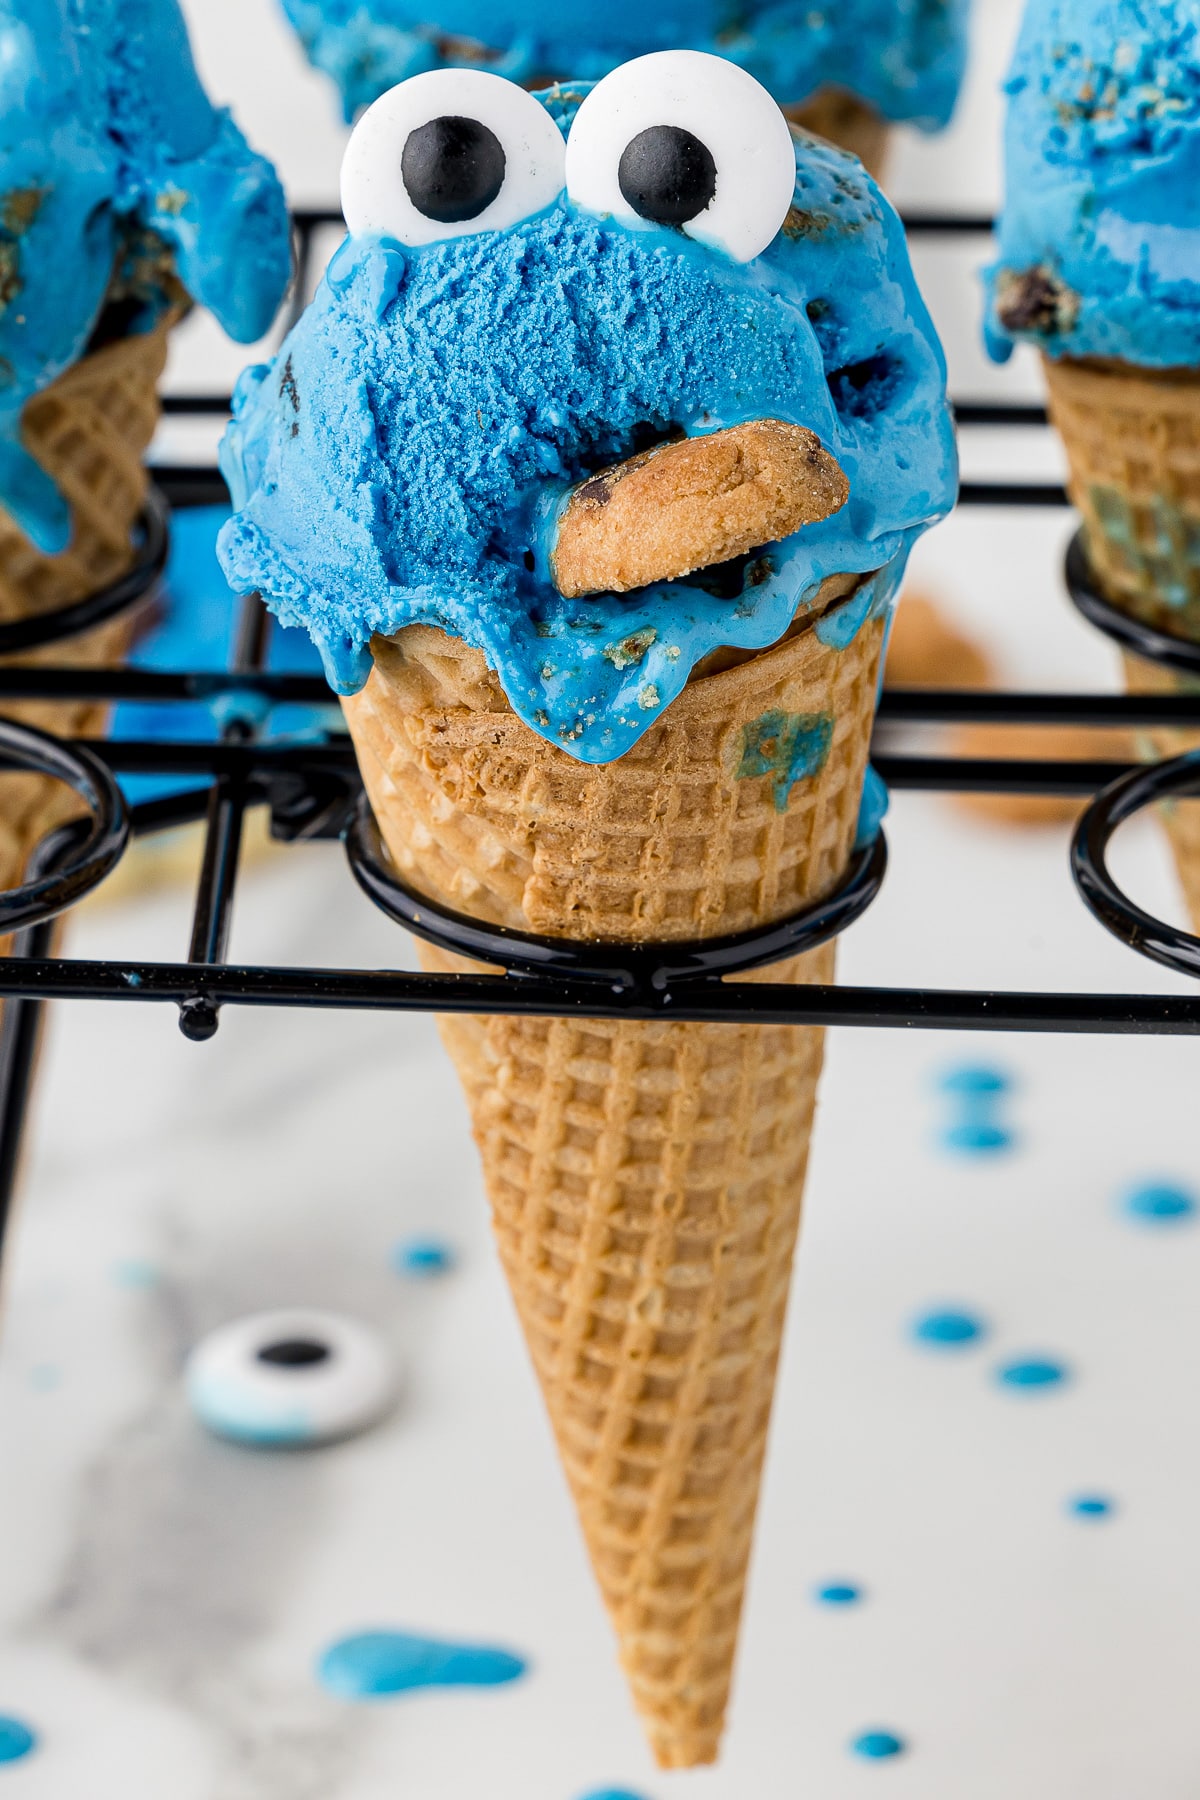 Cute clue ice cream in a sugar cone with candy google eyes to make it look like cookie monster with a cookie in his mouth